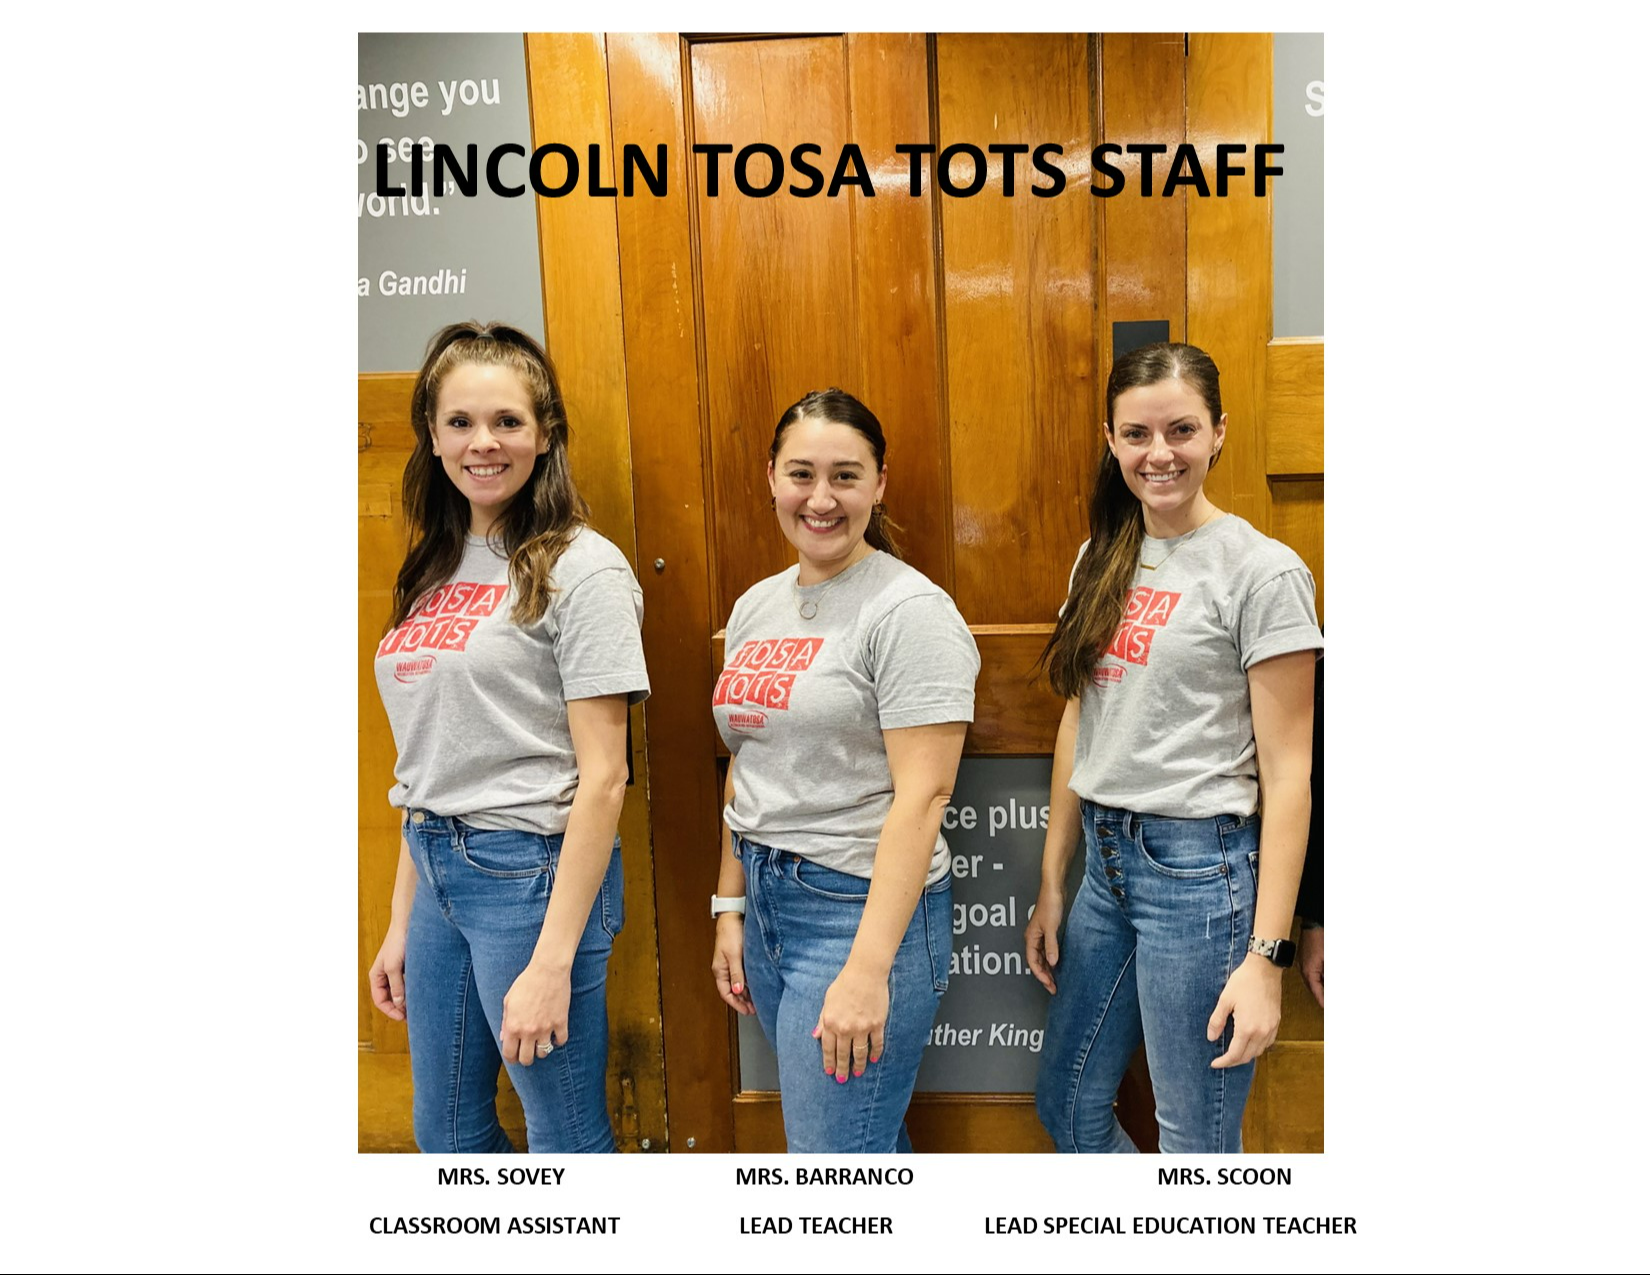 Lincoln Tosa Tots Staff